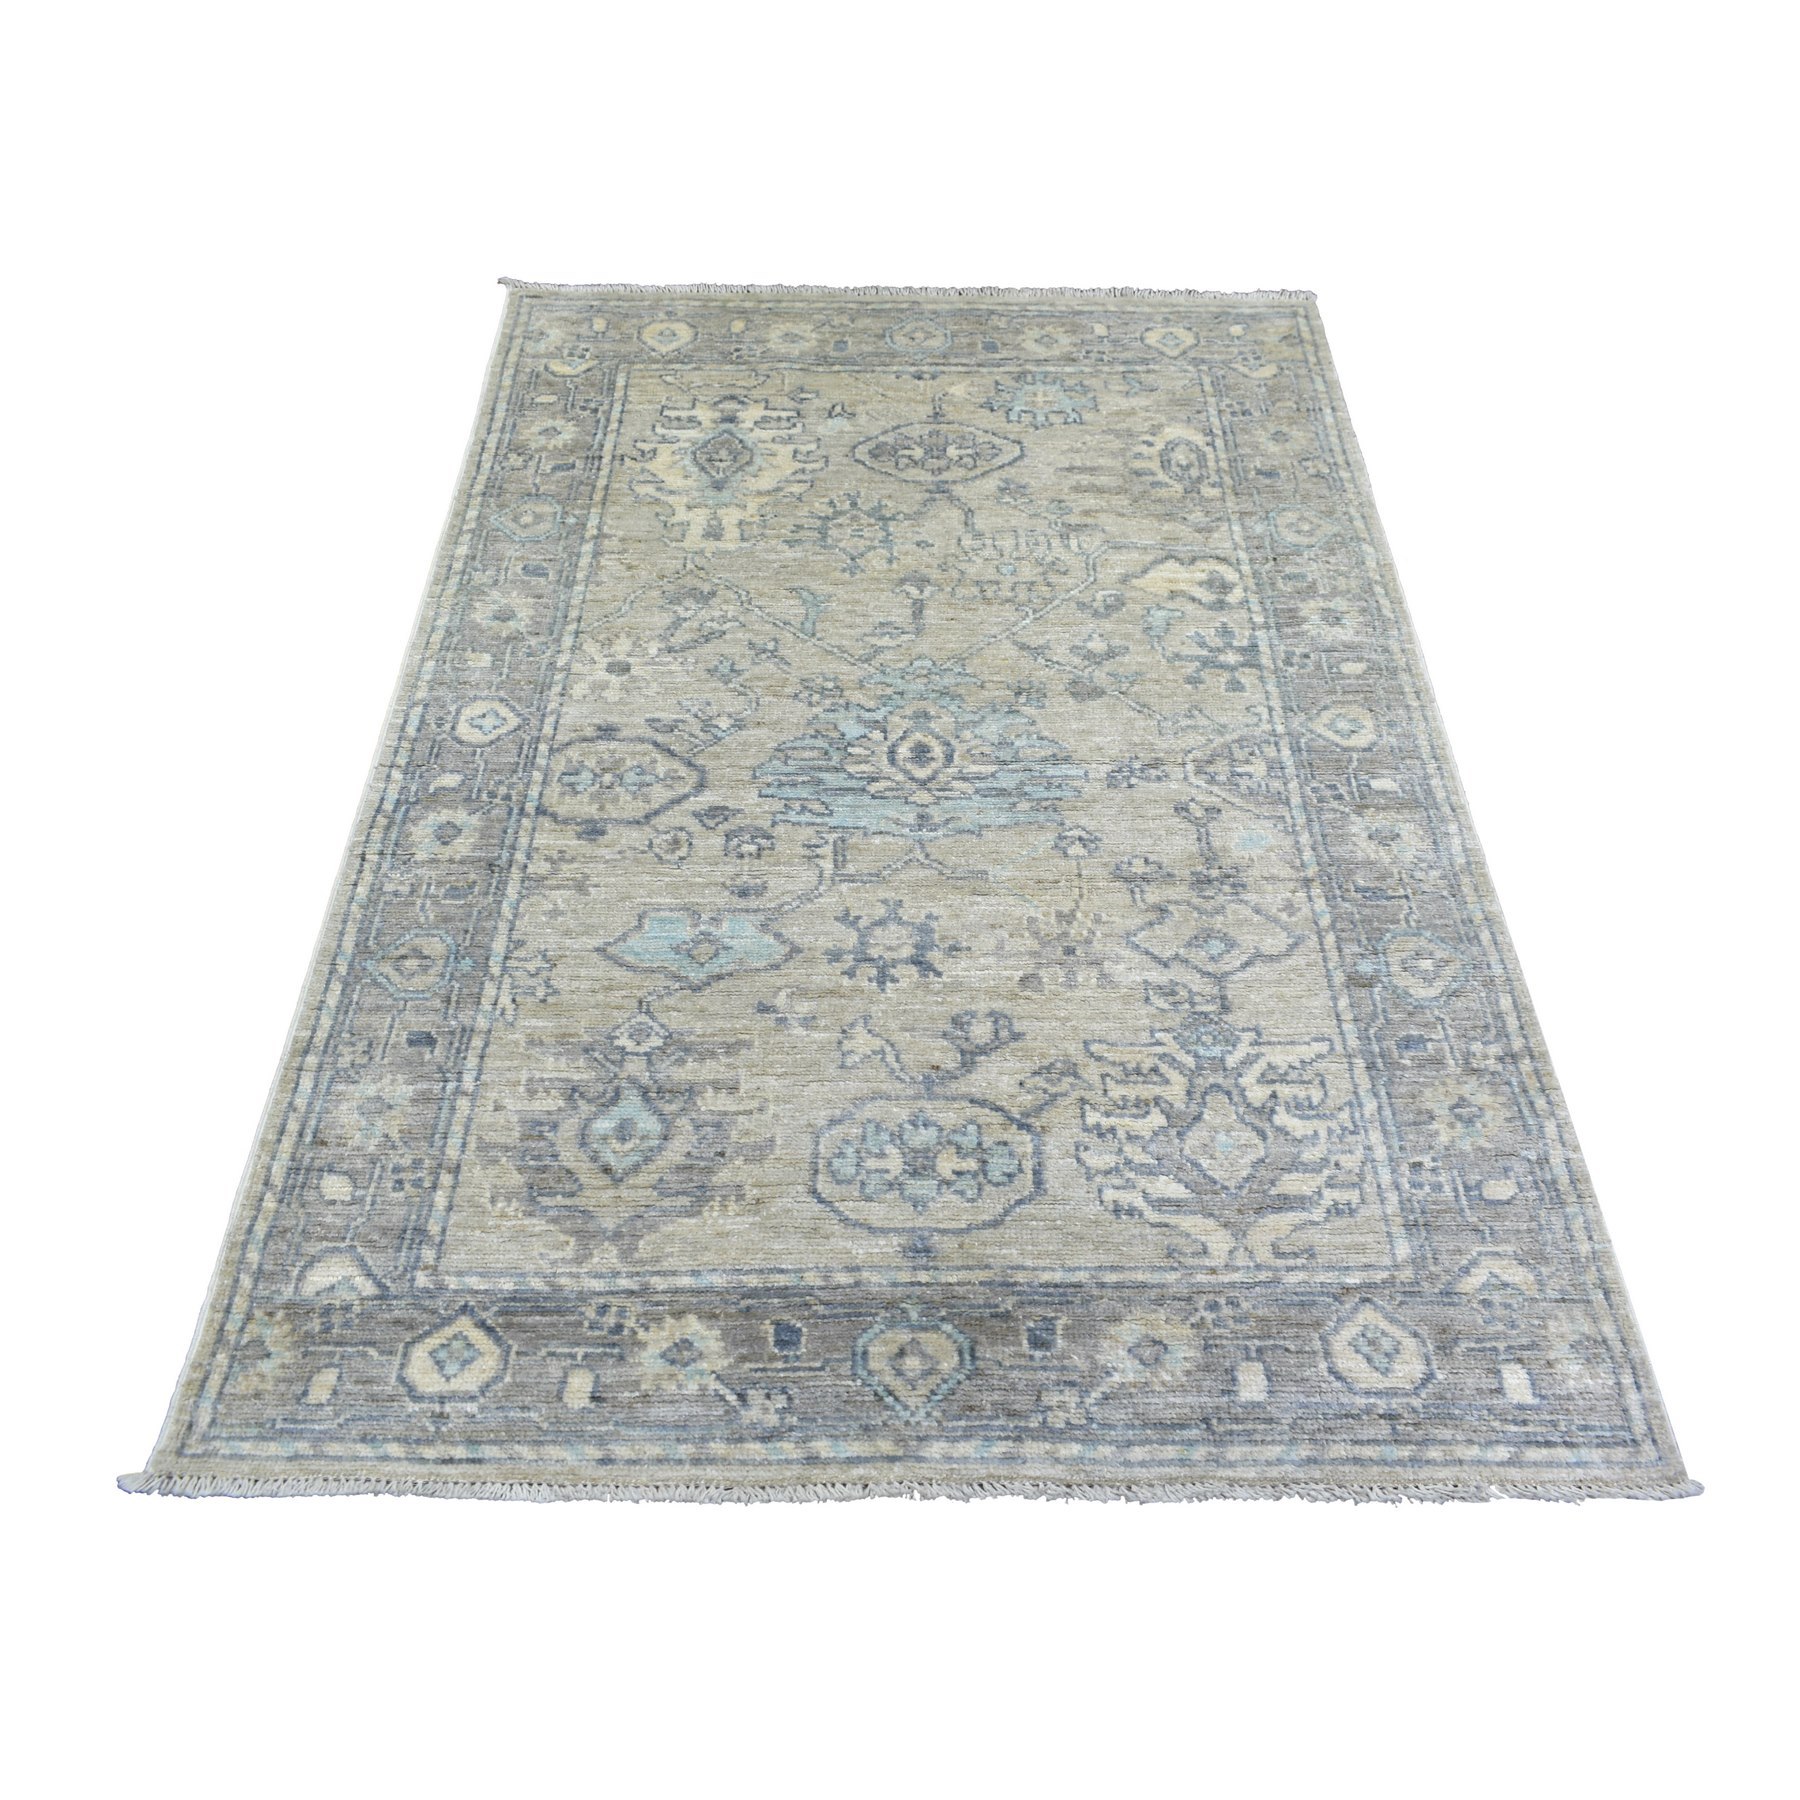 4'1"x6' Beige Angora Oushak With Large Leaf Design Natural Dyes, Afghan Wool Hand Woven Oriental Rug 